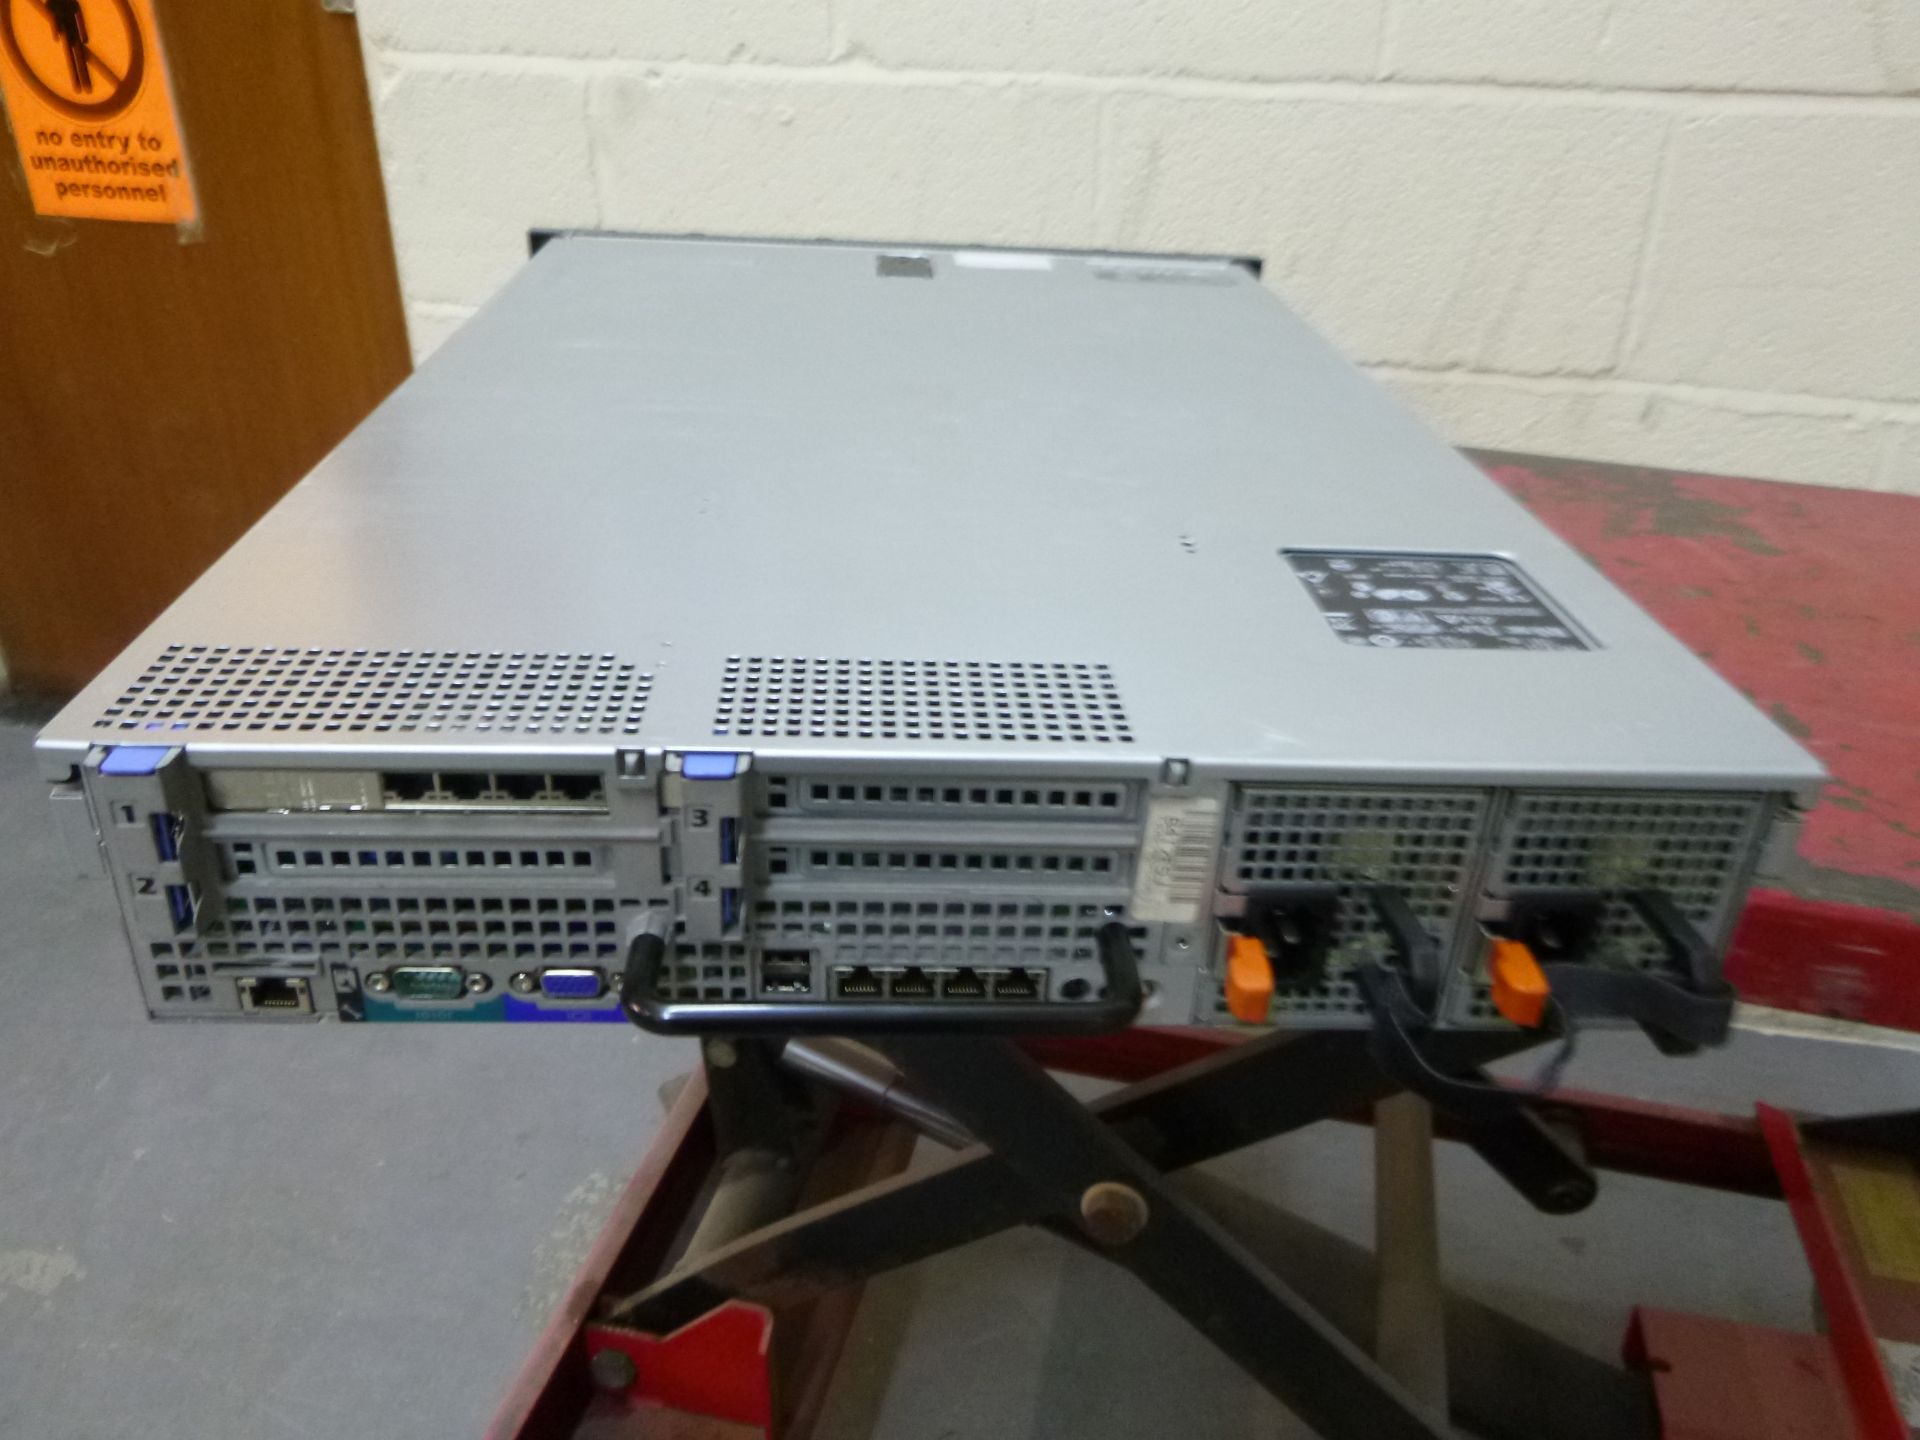 DELL EQUAL LOGIC DX6000 RACKMOUNT 2U FILESERVER. XEON E5640 QUAD CORE 2.67GHZ PROCESSOR, 12GB DDR3 - Image 2 of 2